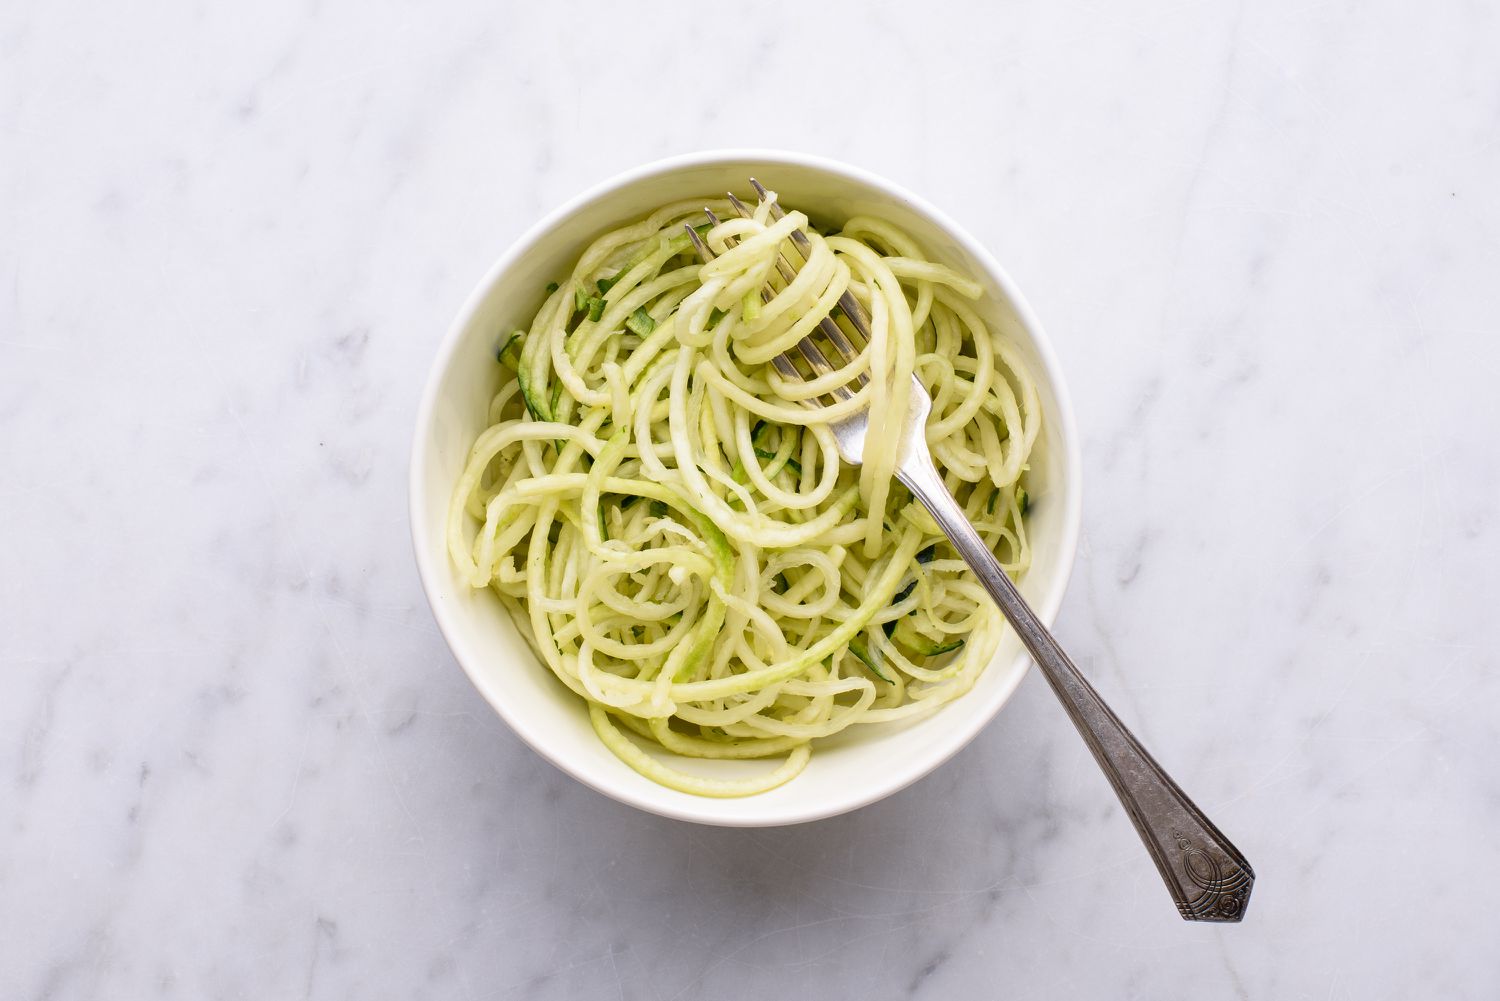 zoodles (zucchini noodles) in a bowl